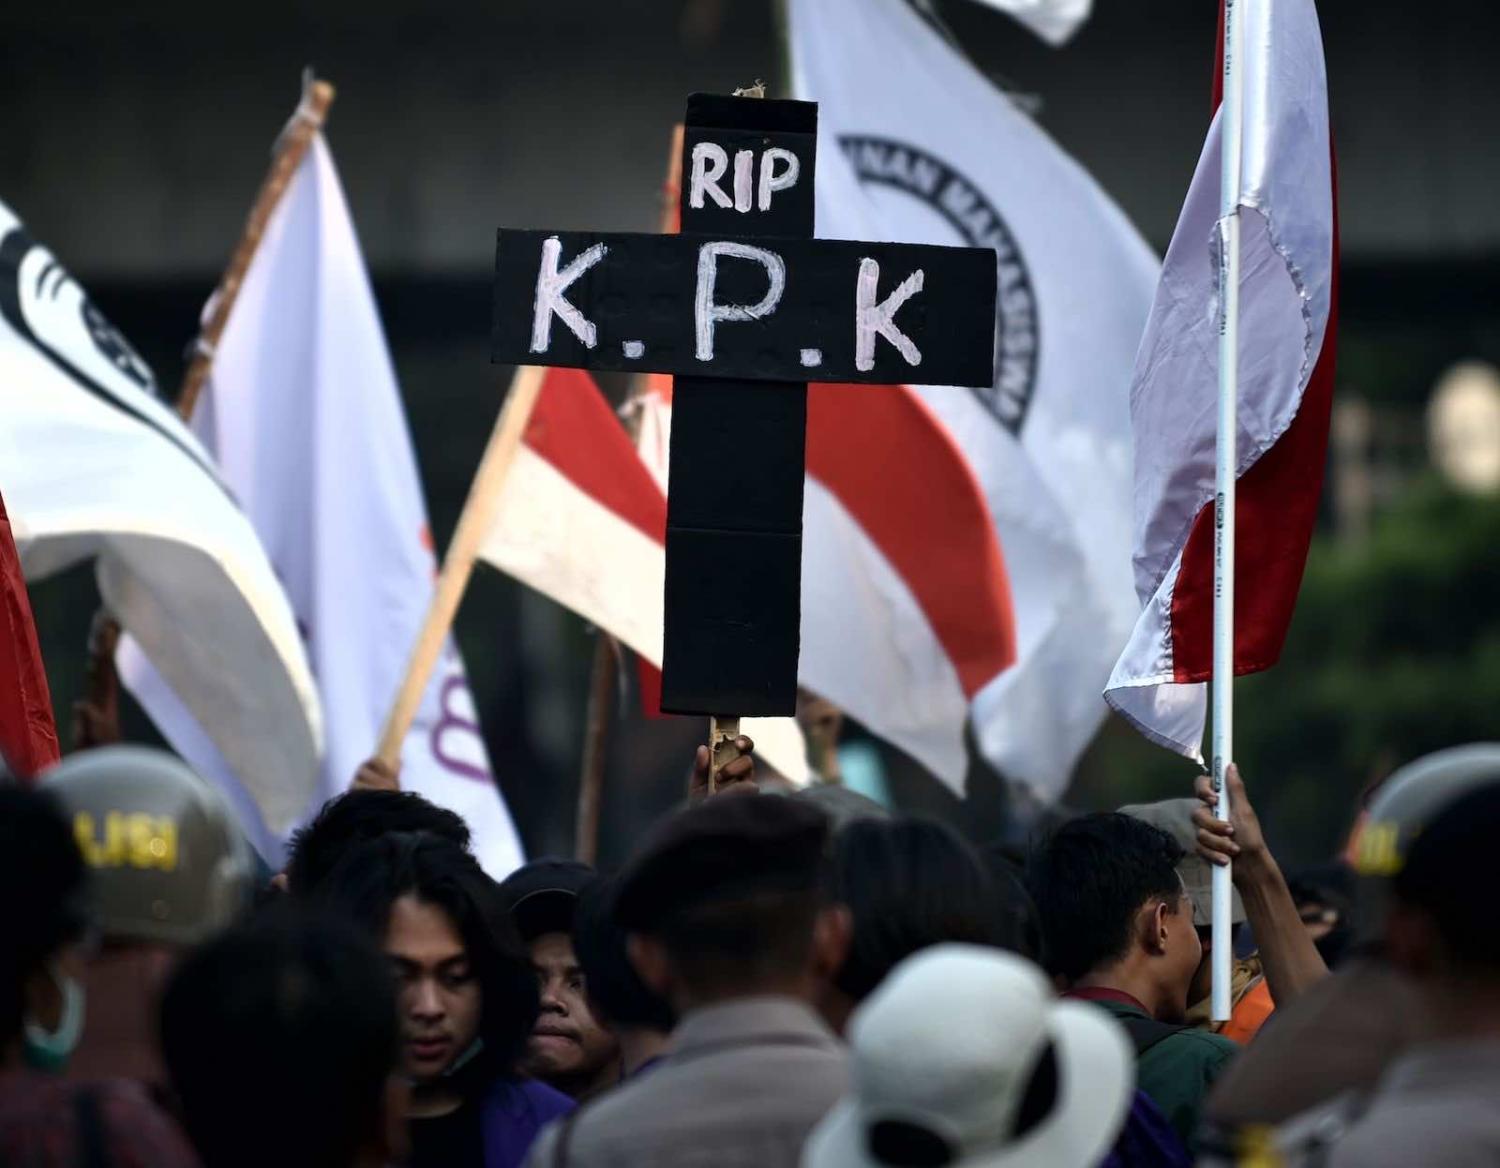 Demonstrations against proposed legislative changes in 2019 to anti-corruption laws: the latest concern focuses on a so-called “civics” test for staff at the Corruption Eradication Commission, or KPK (Bay Ismoyo/AFP via Getty Images)